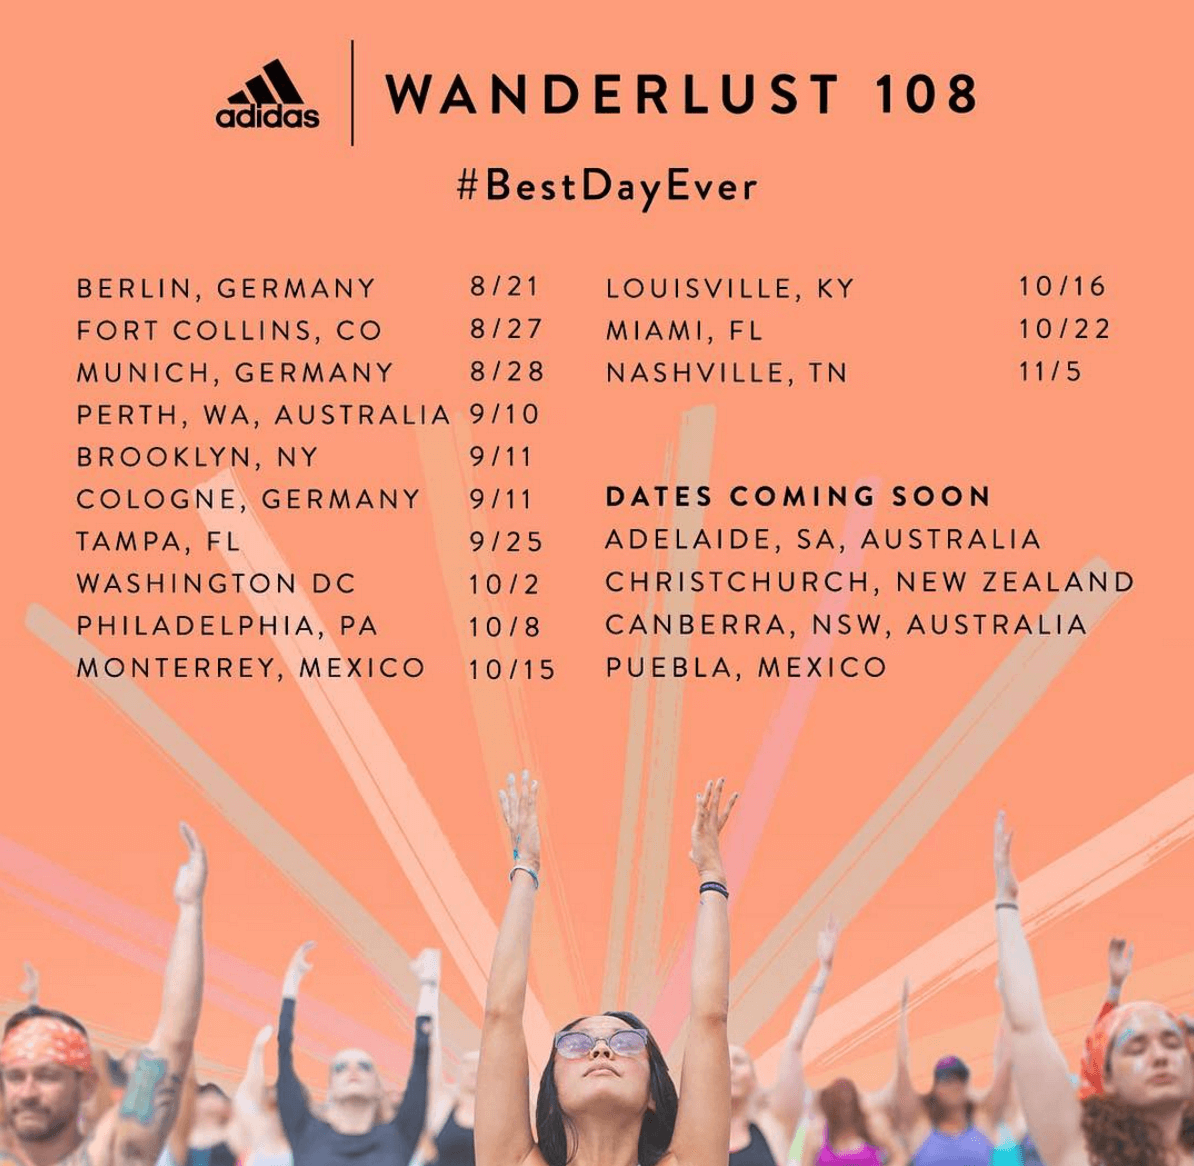 Events-Up-Coming-Wanderlust-108-Festival-Brooklyn-LineUp